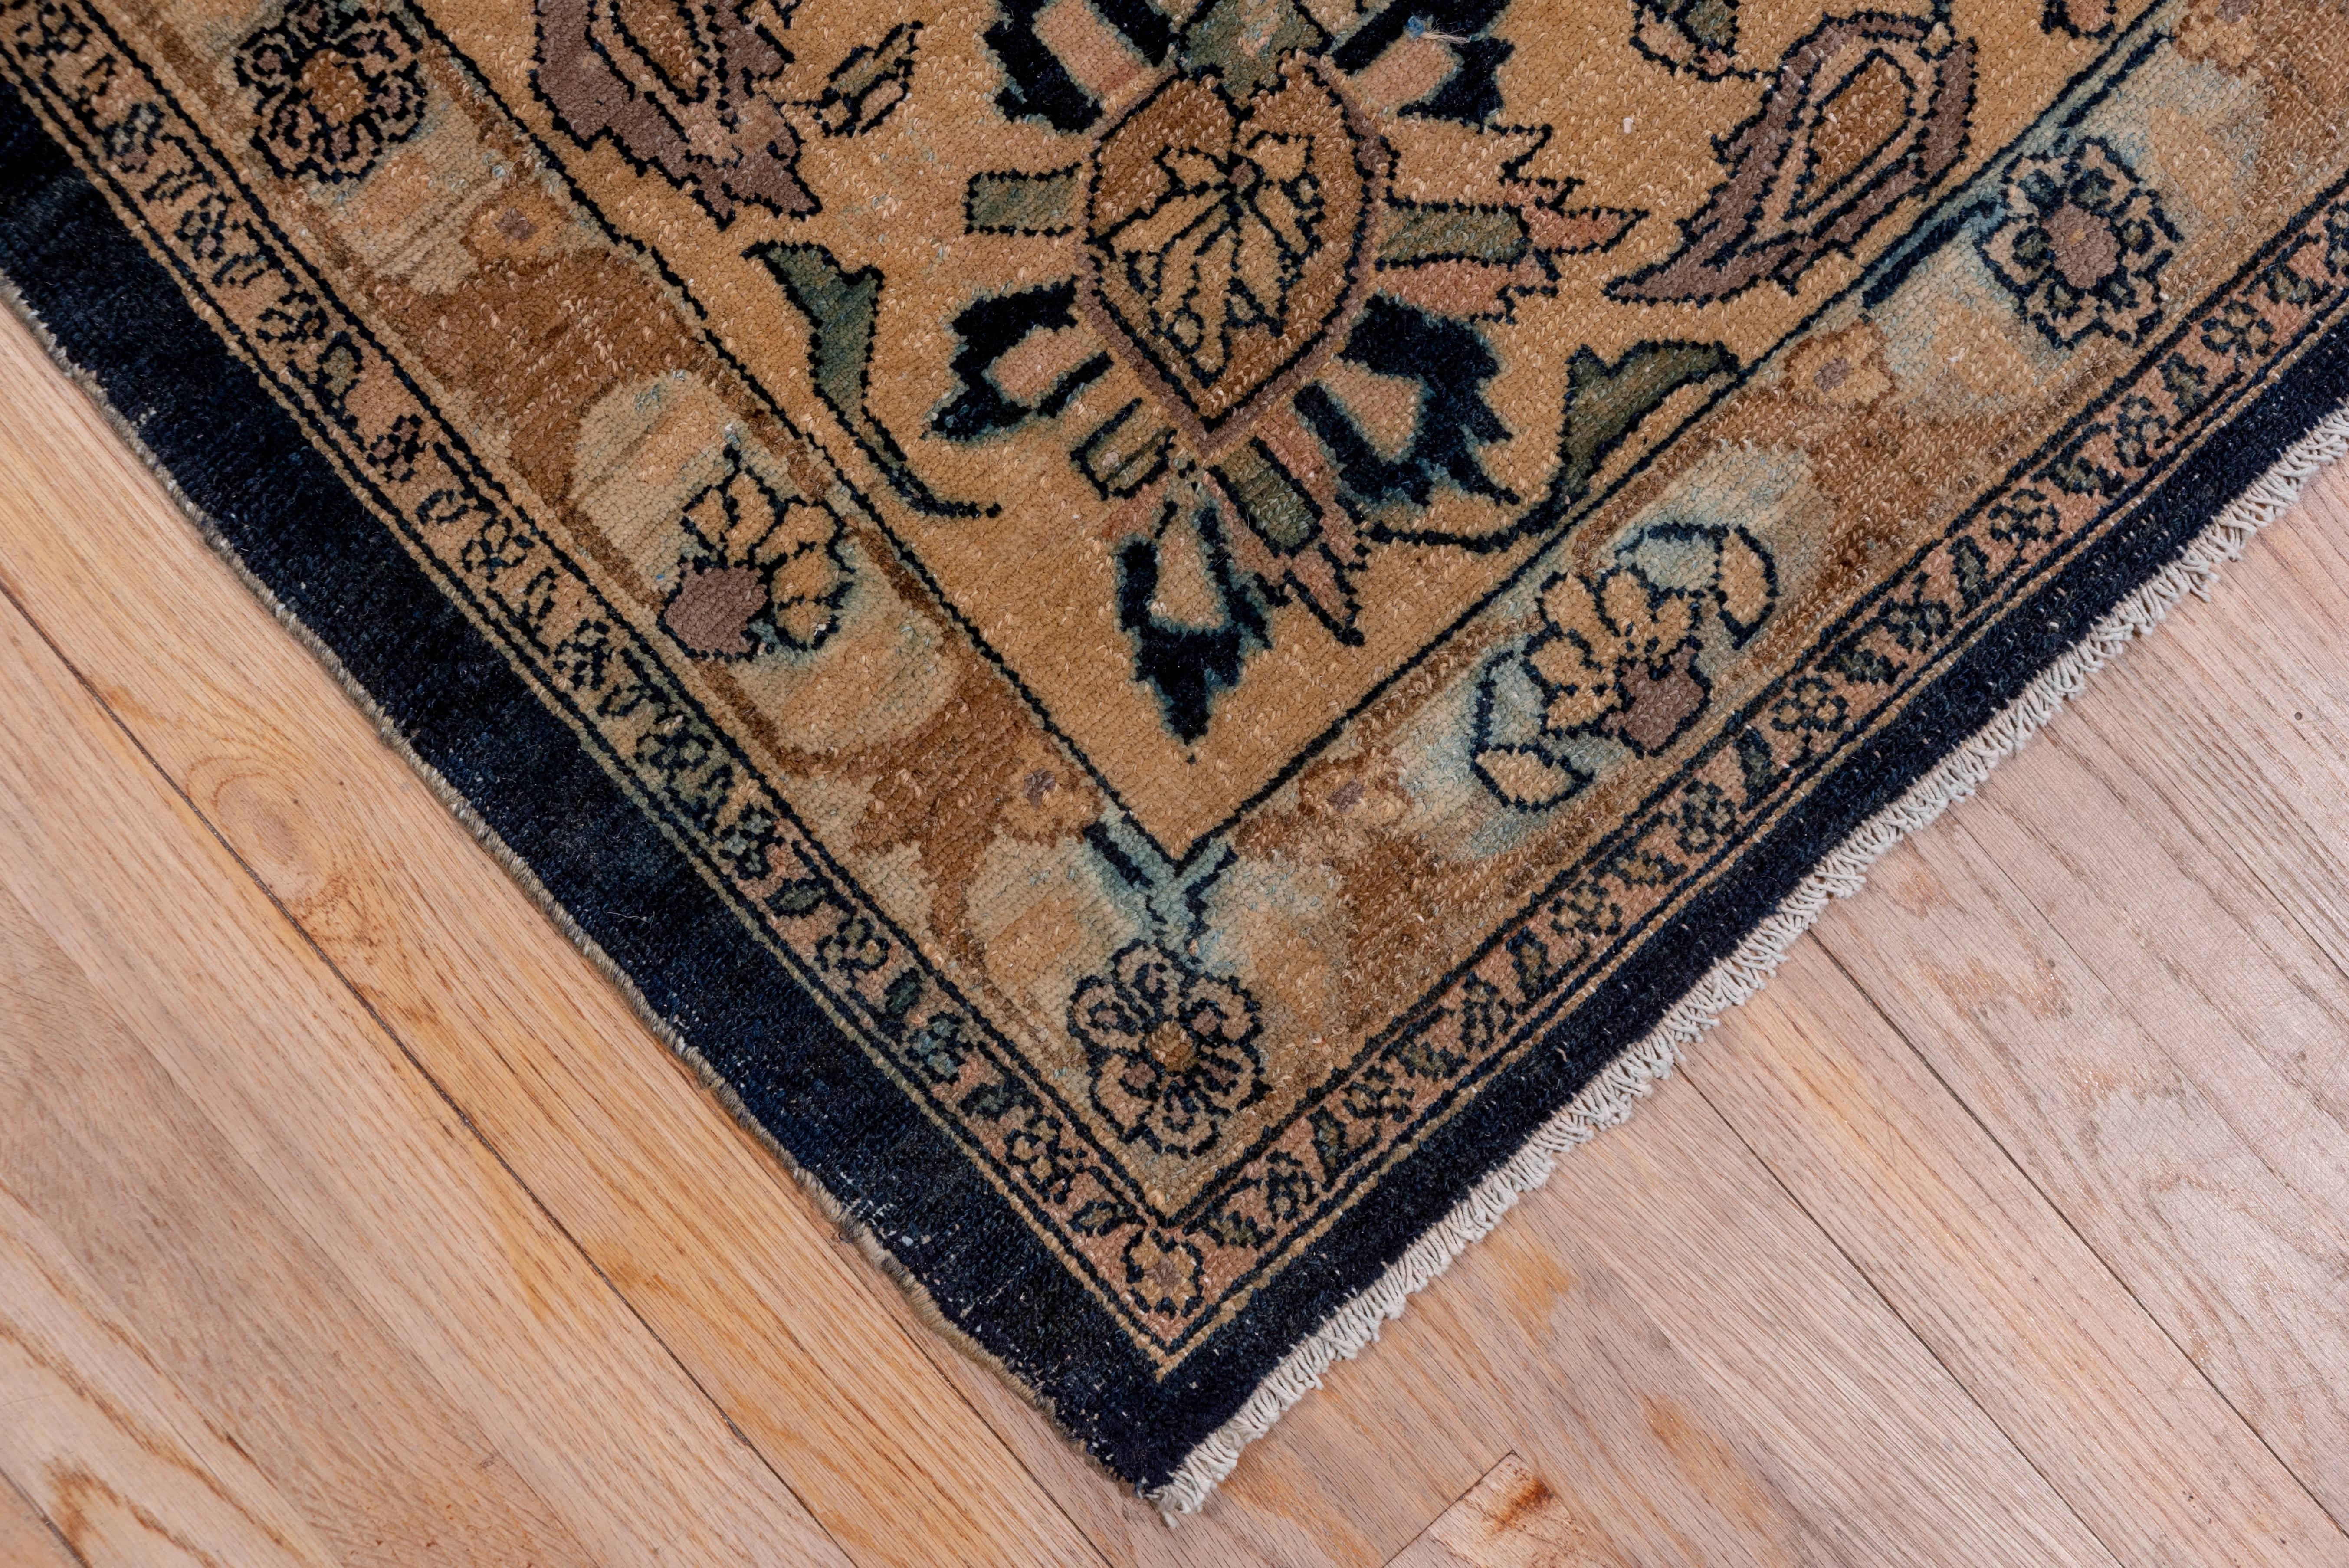 Antique Persian Malayer Carpet In Excellent Condition For Sale In New York, NY